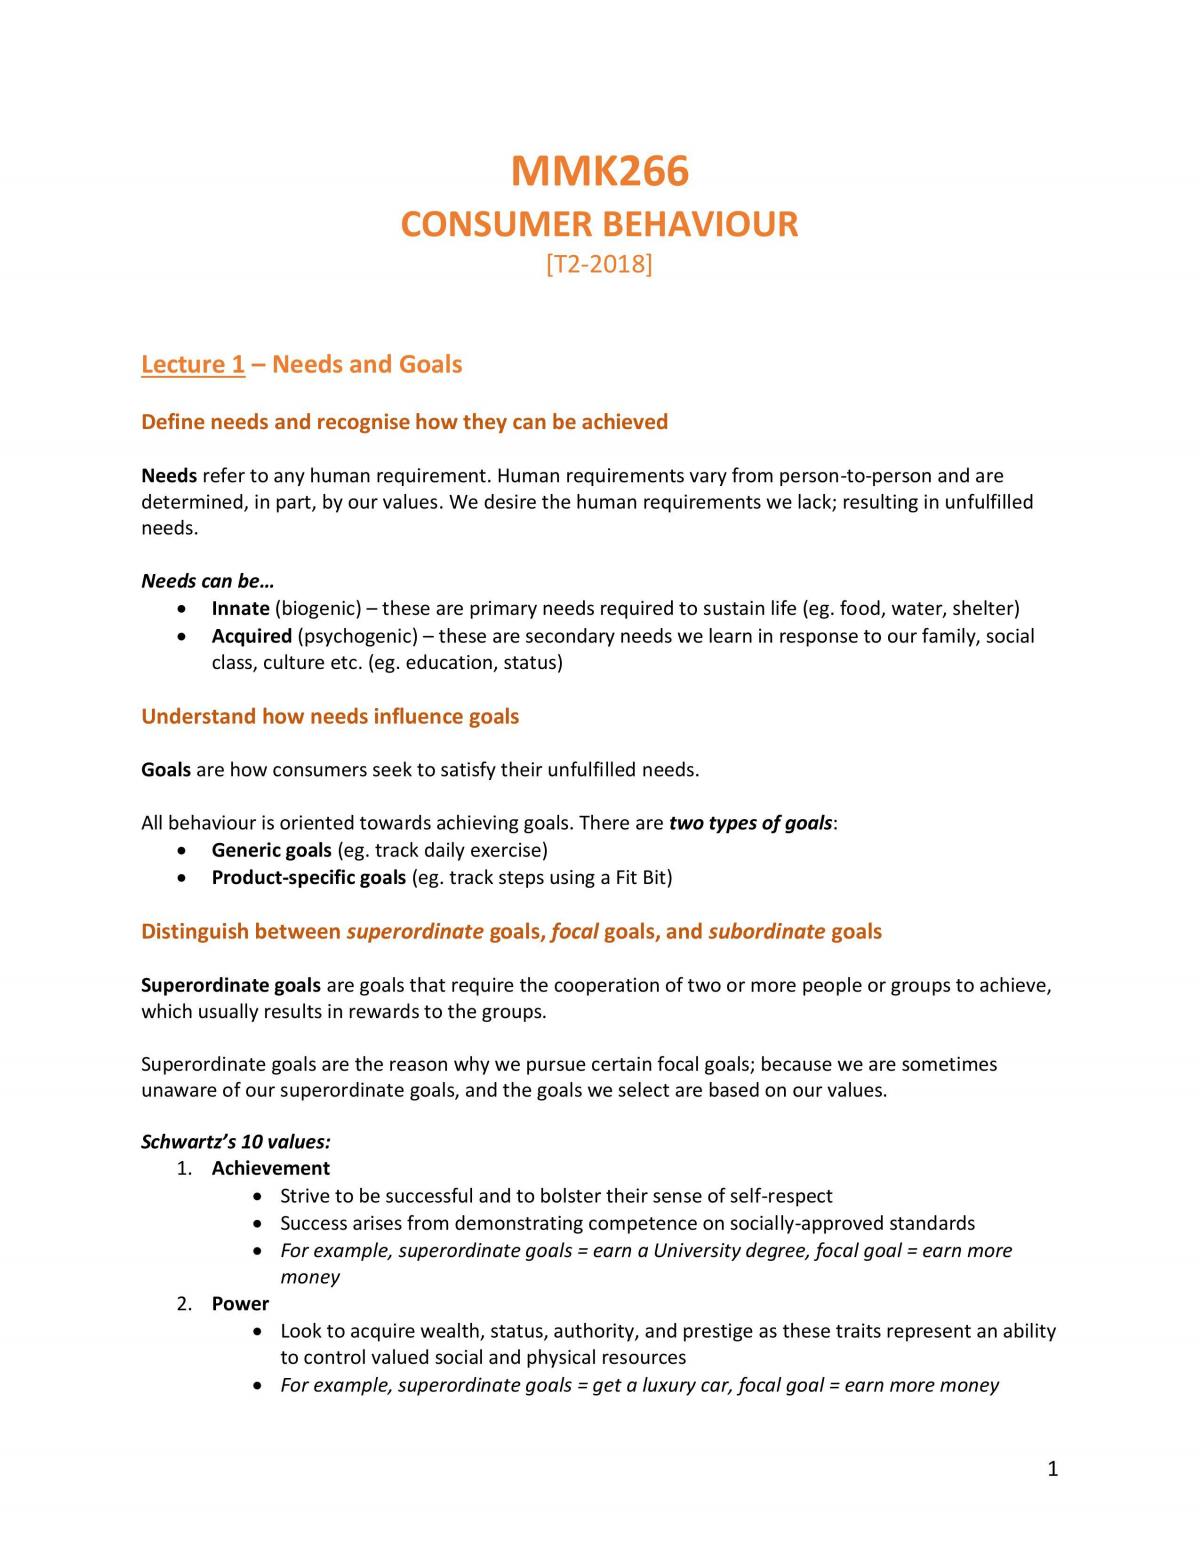 Notes - MMK266 Consumer Behaviour - Page 1